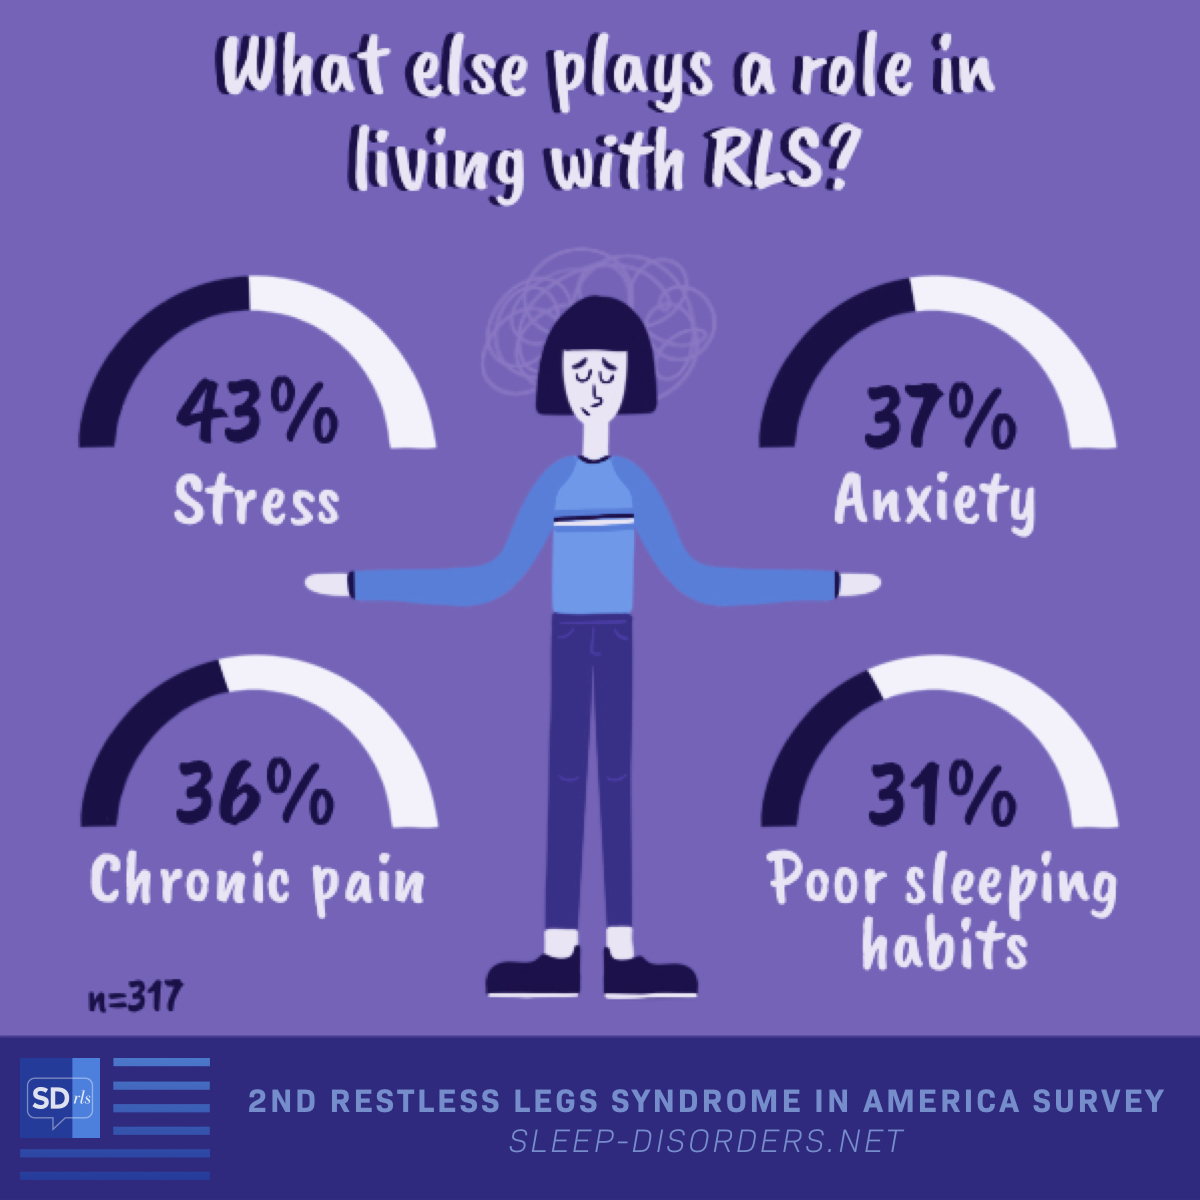 Factors that impact RLS include stress, anxiety, chronic pain, and poor sleeping habits.